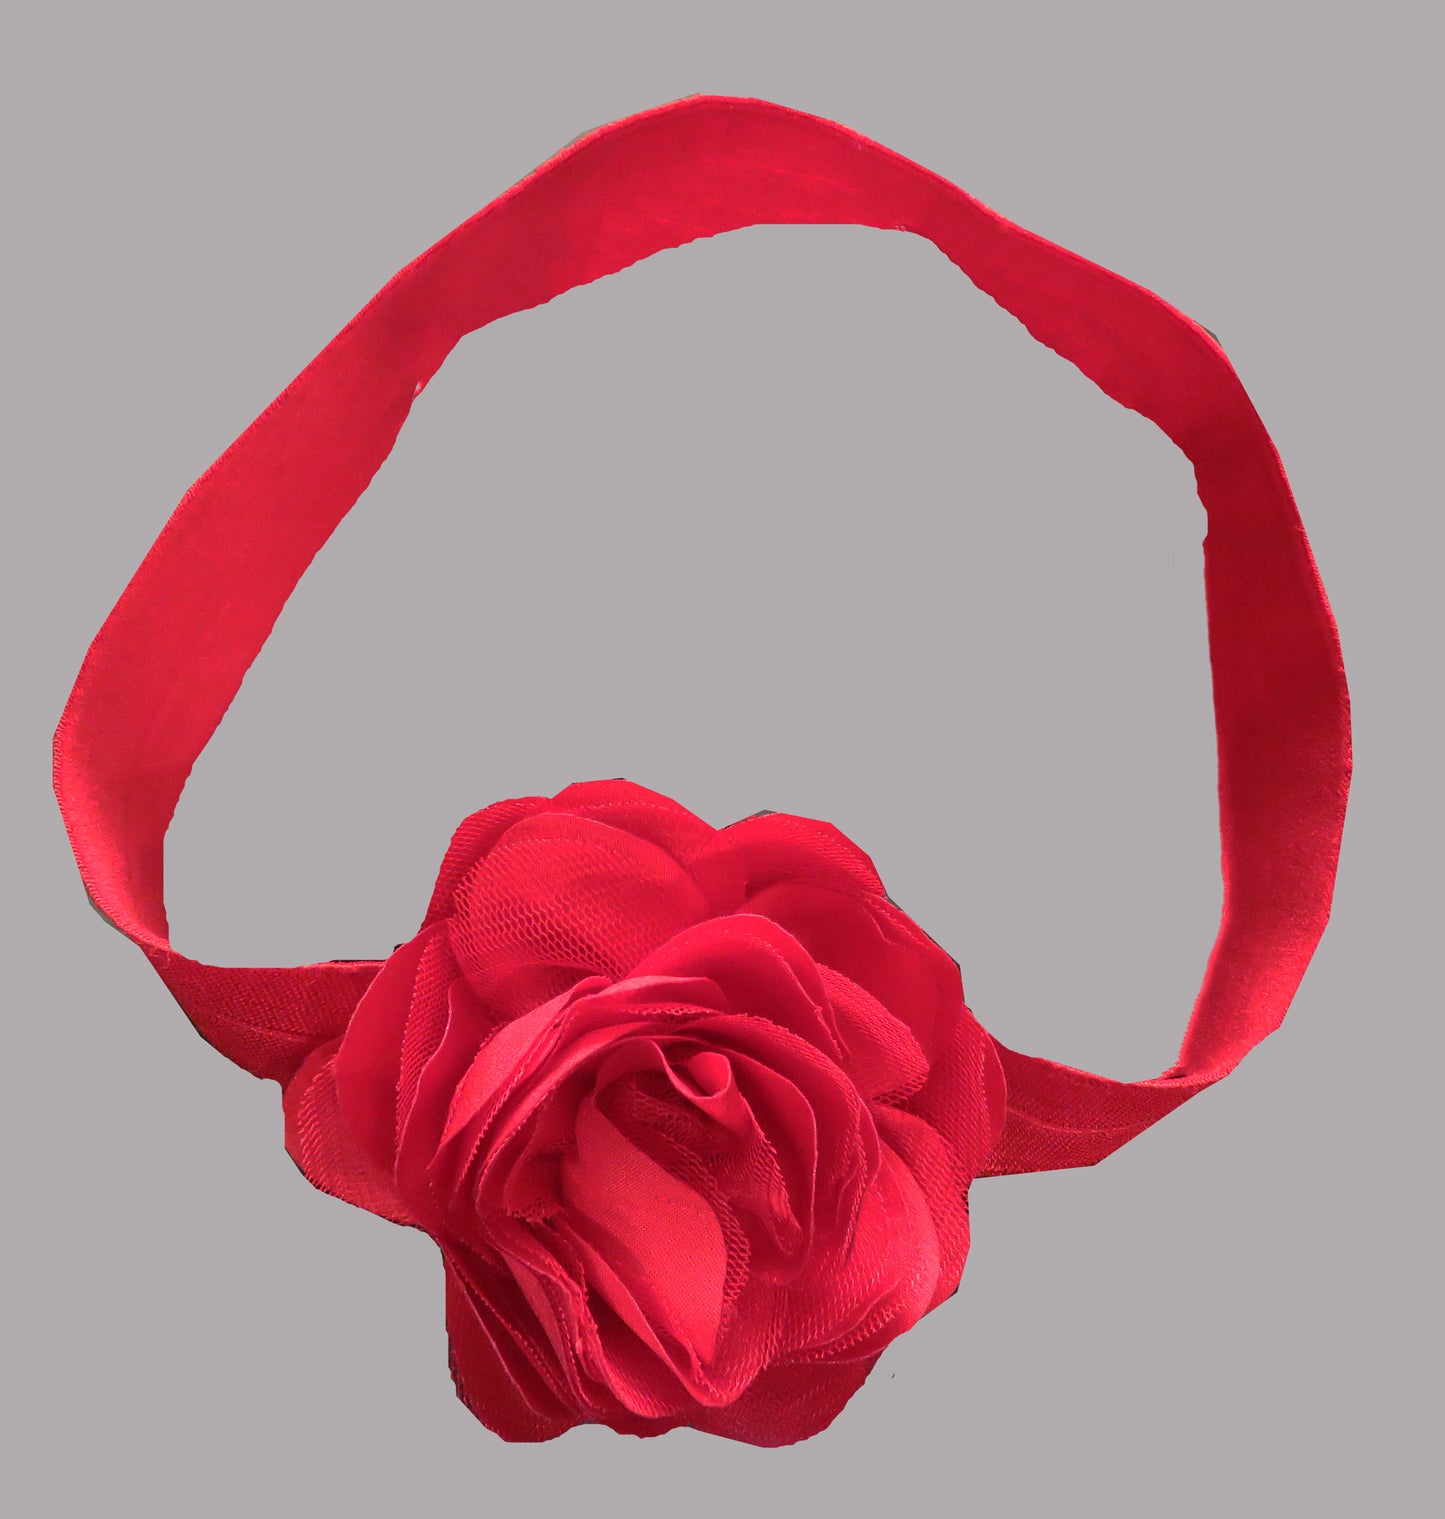 Flower Hairbands In A Combination Of Black,Red,Grey,White,Pink With A Decorative Detail At The Front